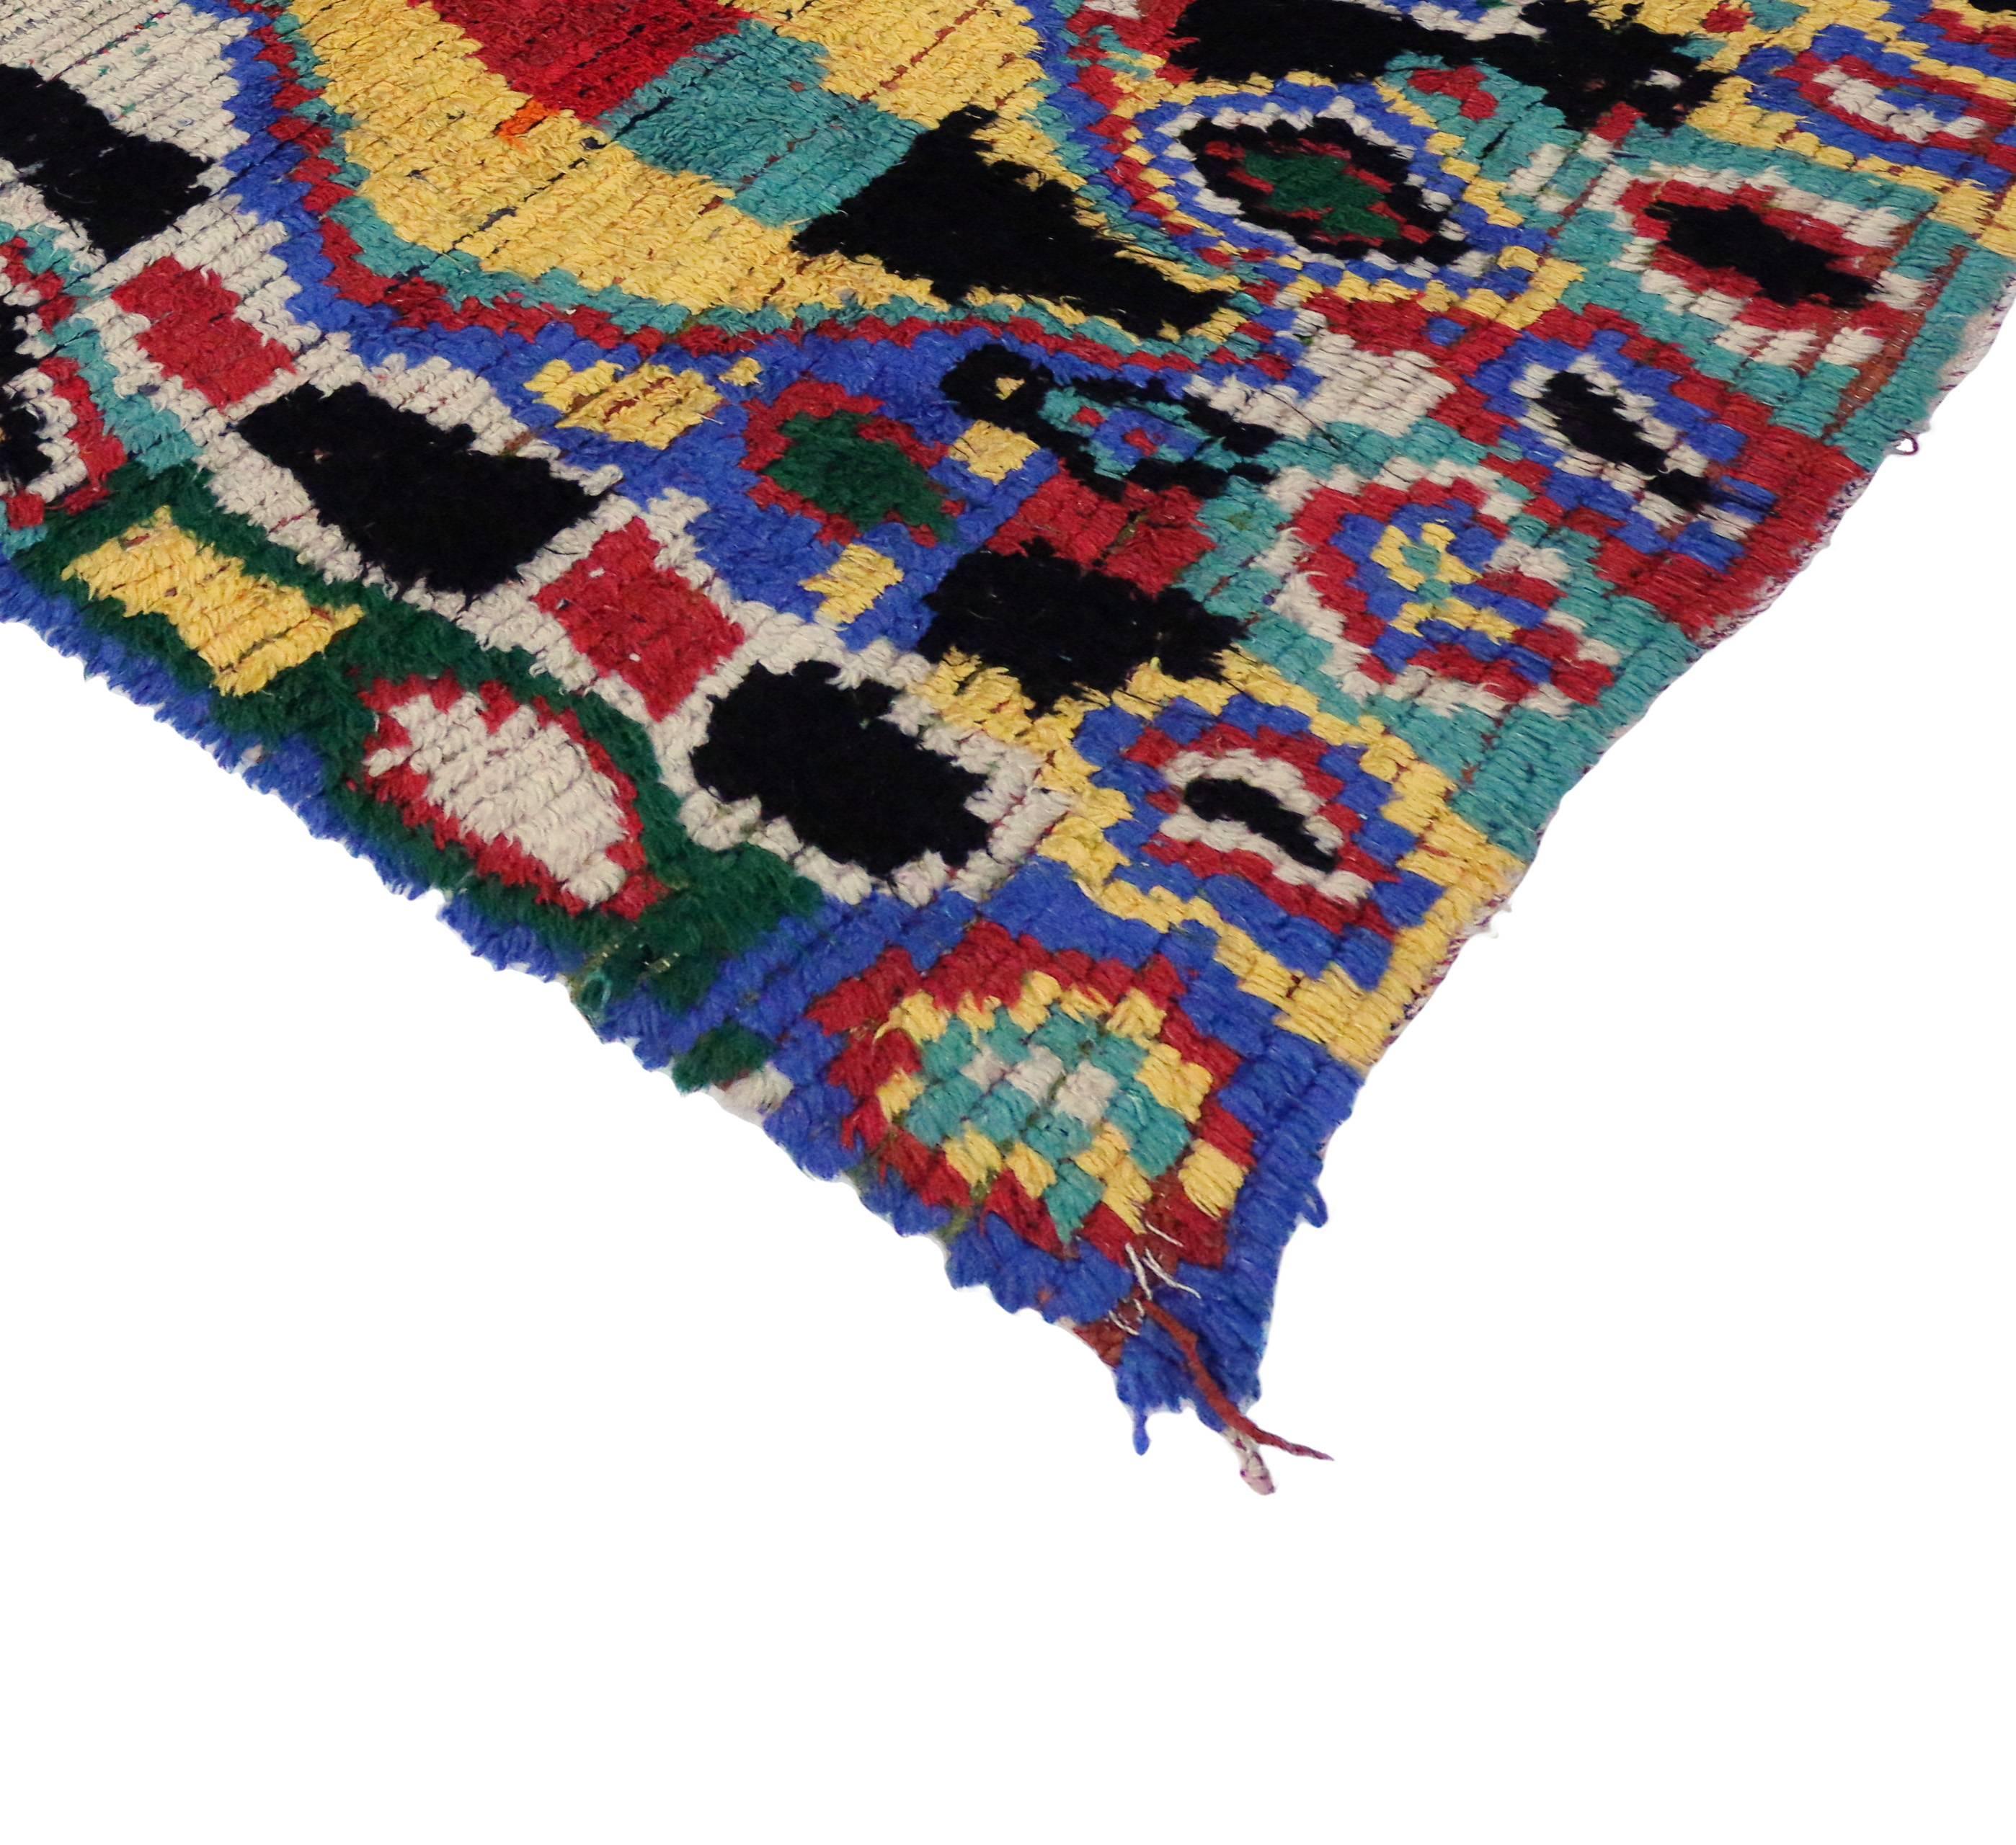 Impeccably woven from the Azilal region of the High Atlas Mountains of Morocco, this vintage Berber Moroccan rug features a contemporary abstract design. Showcasing bold colors and the weaver's creative imagination, this Berber Moroccan rug displays